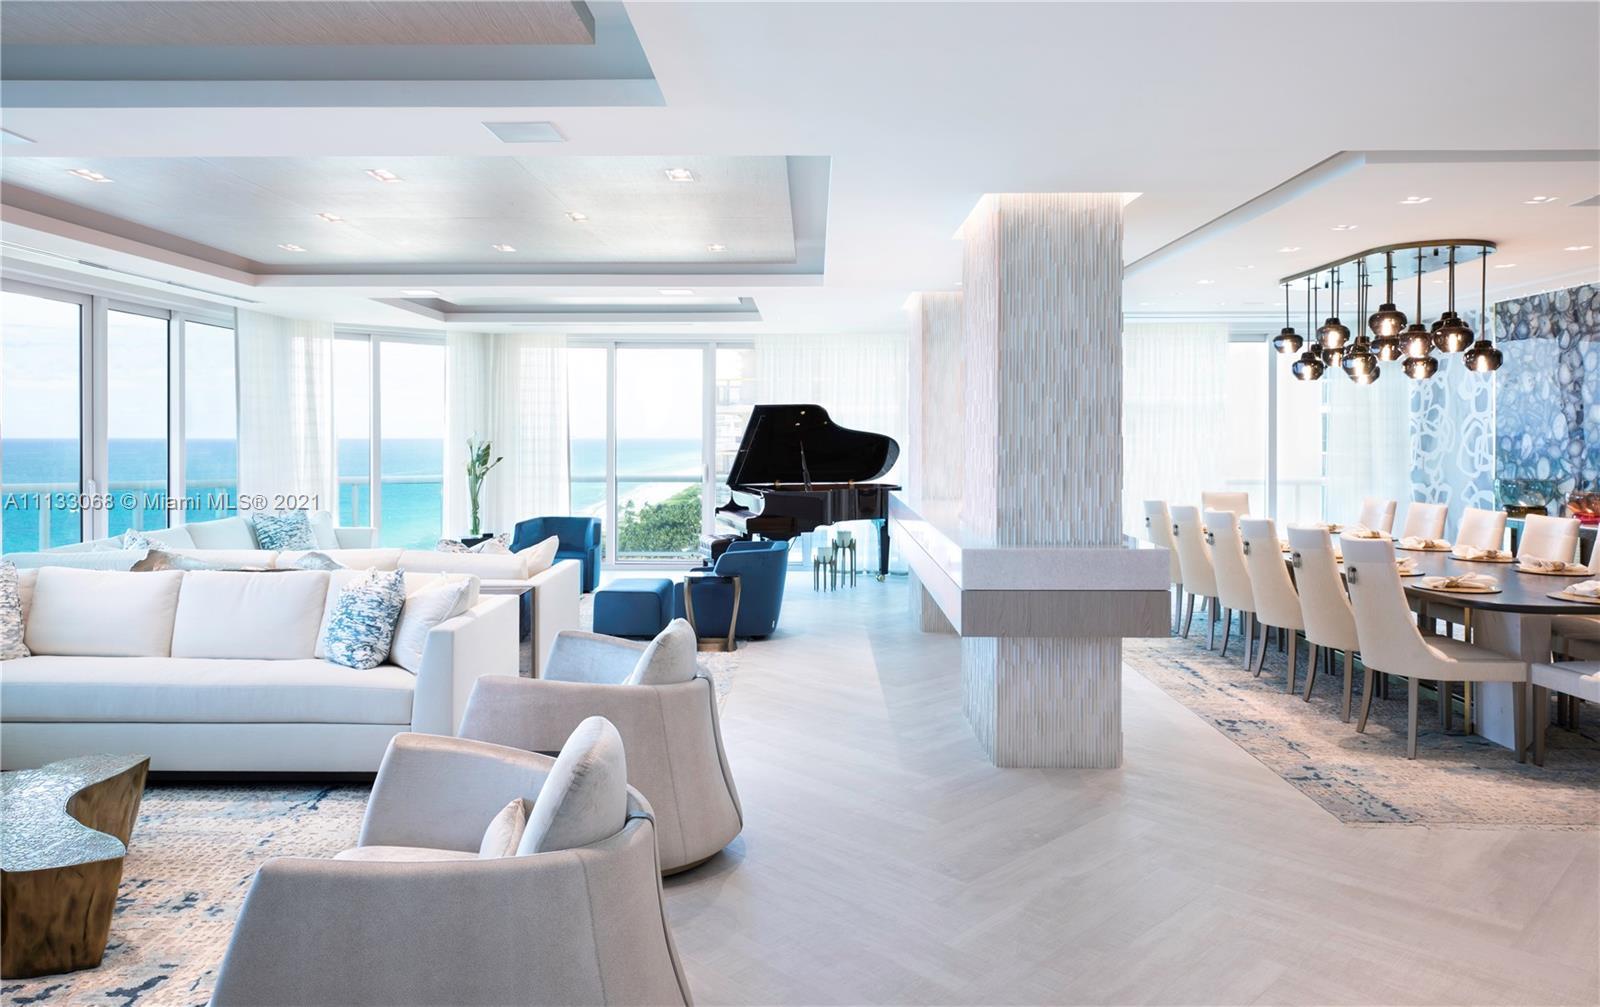 Presenting unit 17E/17F at The Palace, a full-service, luxury condo in a prime Bal Harbour location.